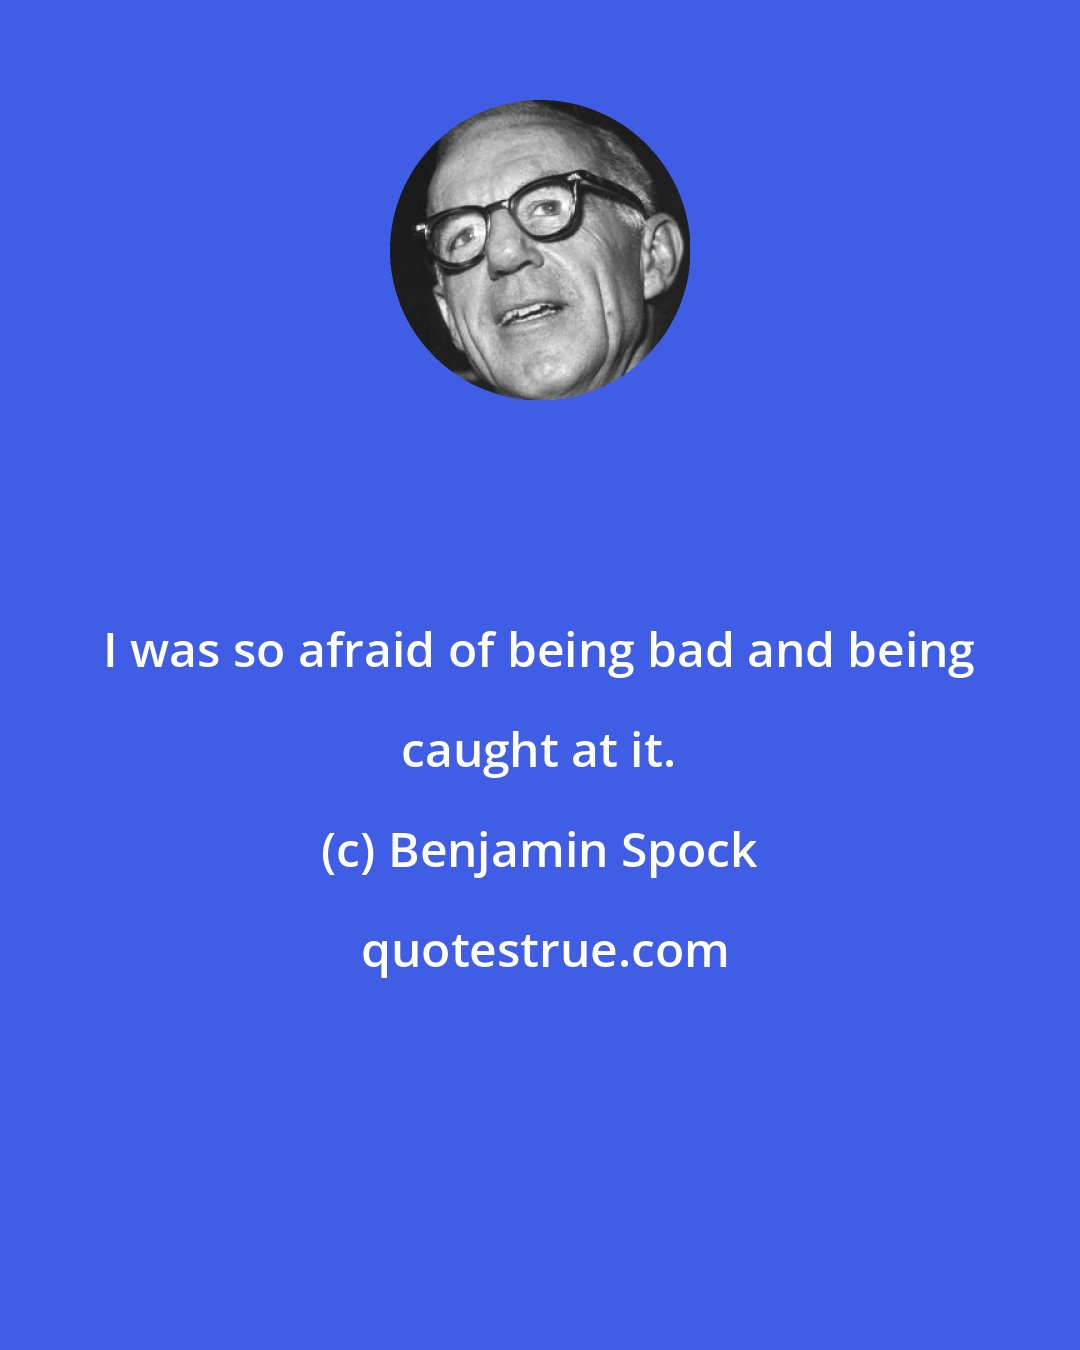 Benjamin Spock: I was so afraid of being bad and being caught at it.